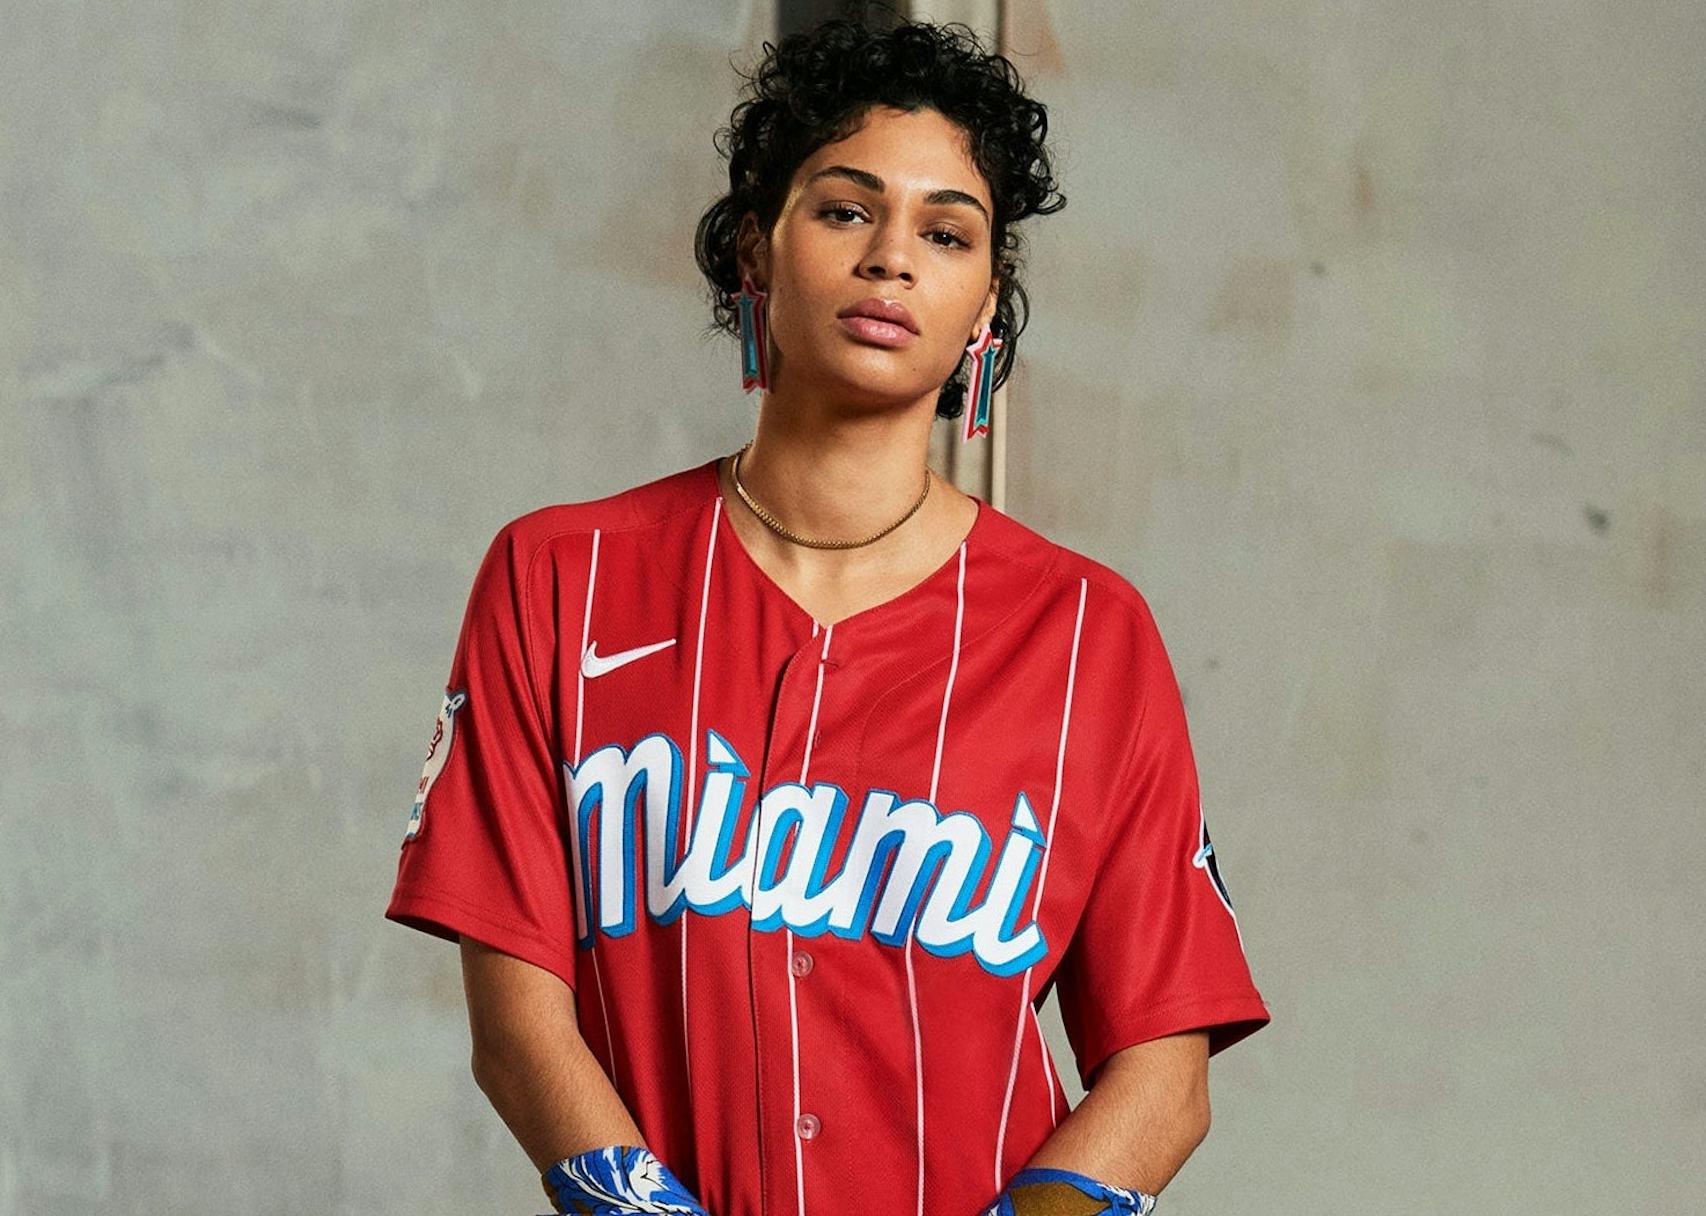 These jerseys will make you look (and feel) amazing all day long